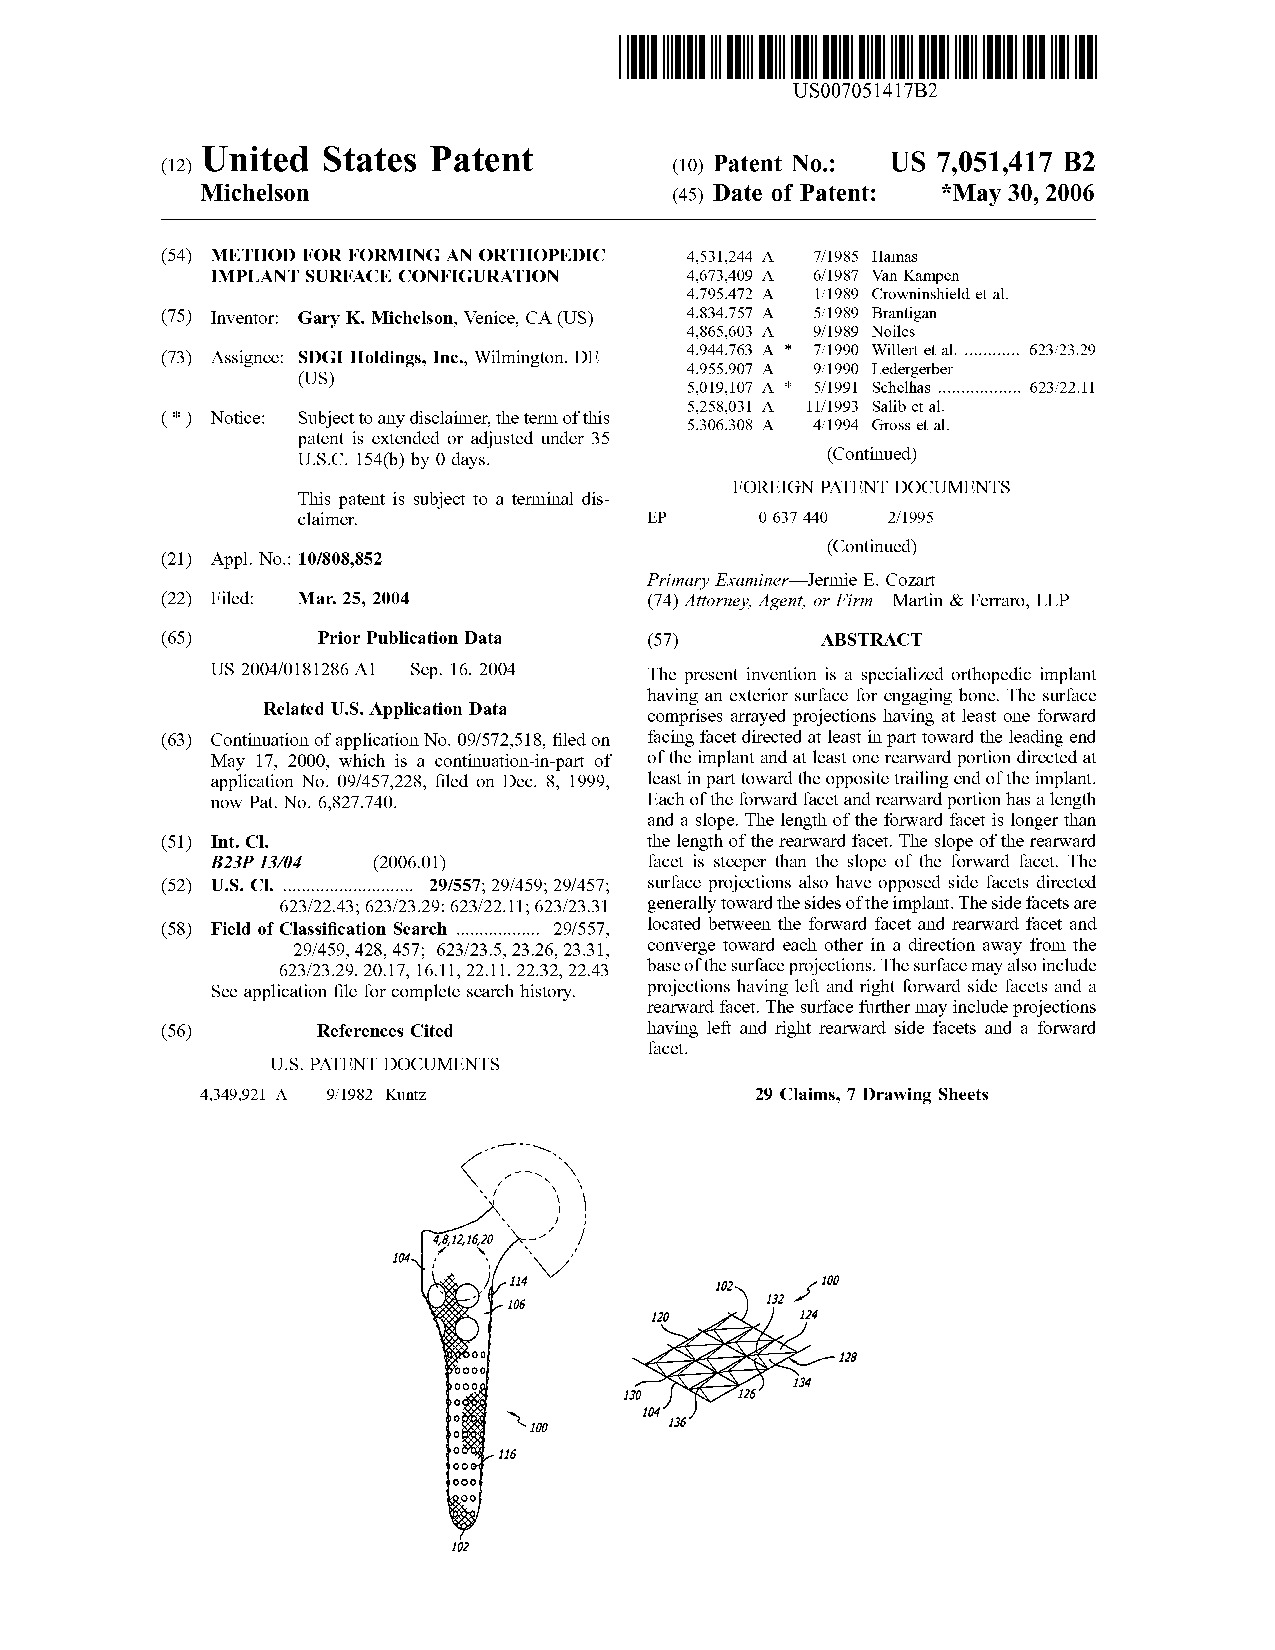 Method for forming an orthopedic implant surface configuration - Patent 7,051,417